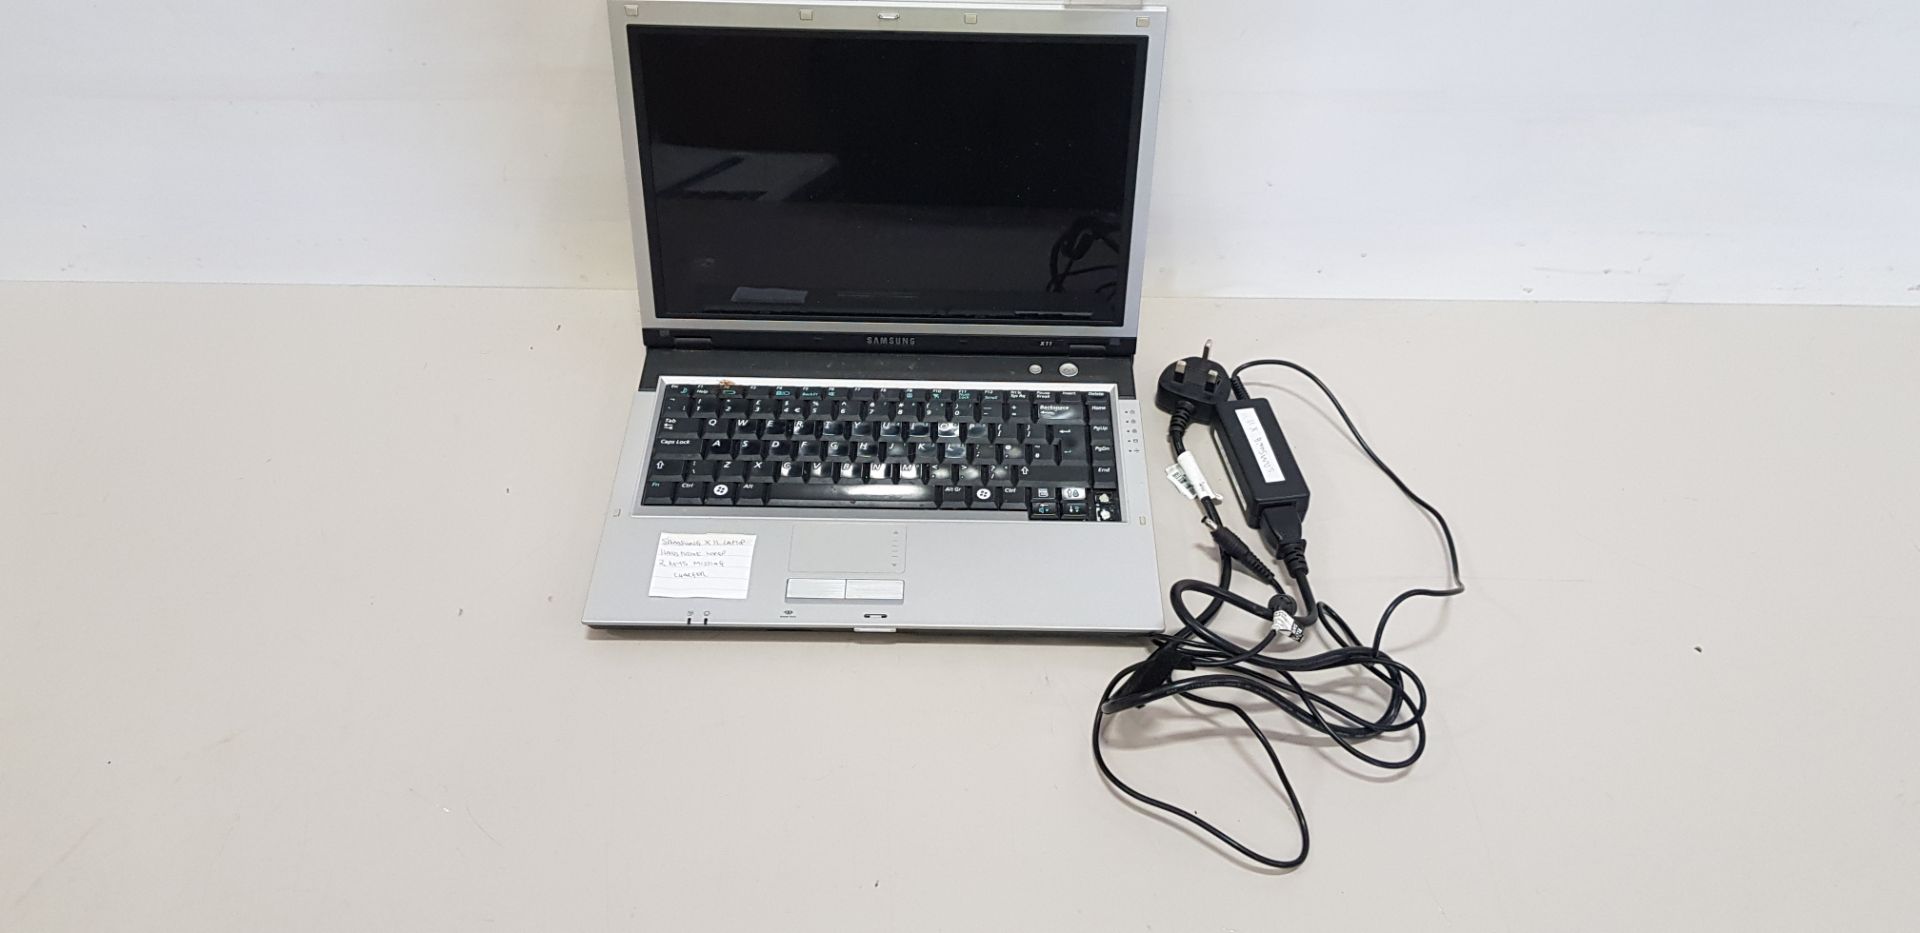 SAMSUNG X 11 LAPTOP - HARD DRIVE WIPED - COMES WITH CHARGER - ( 2 KEYS MISSING ) RIGHT ARROW AND